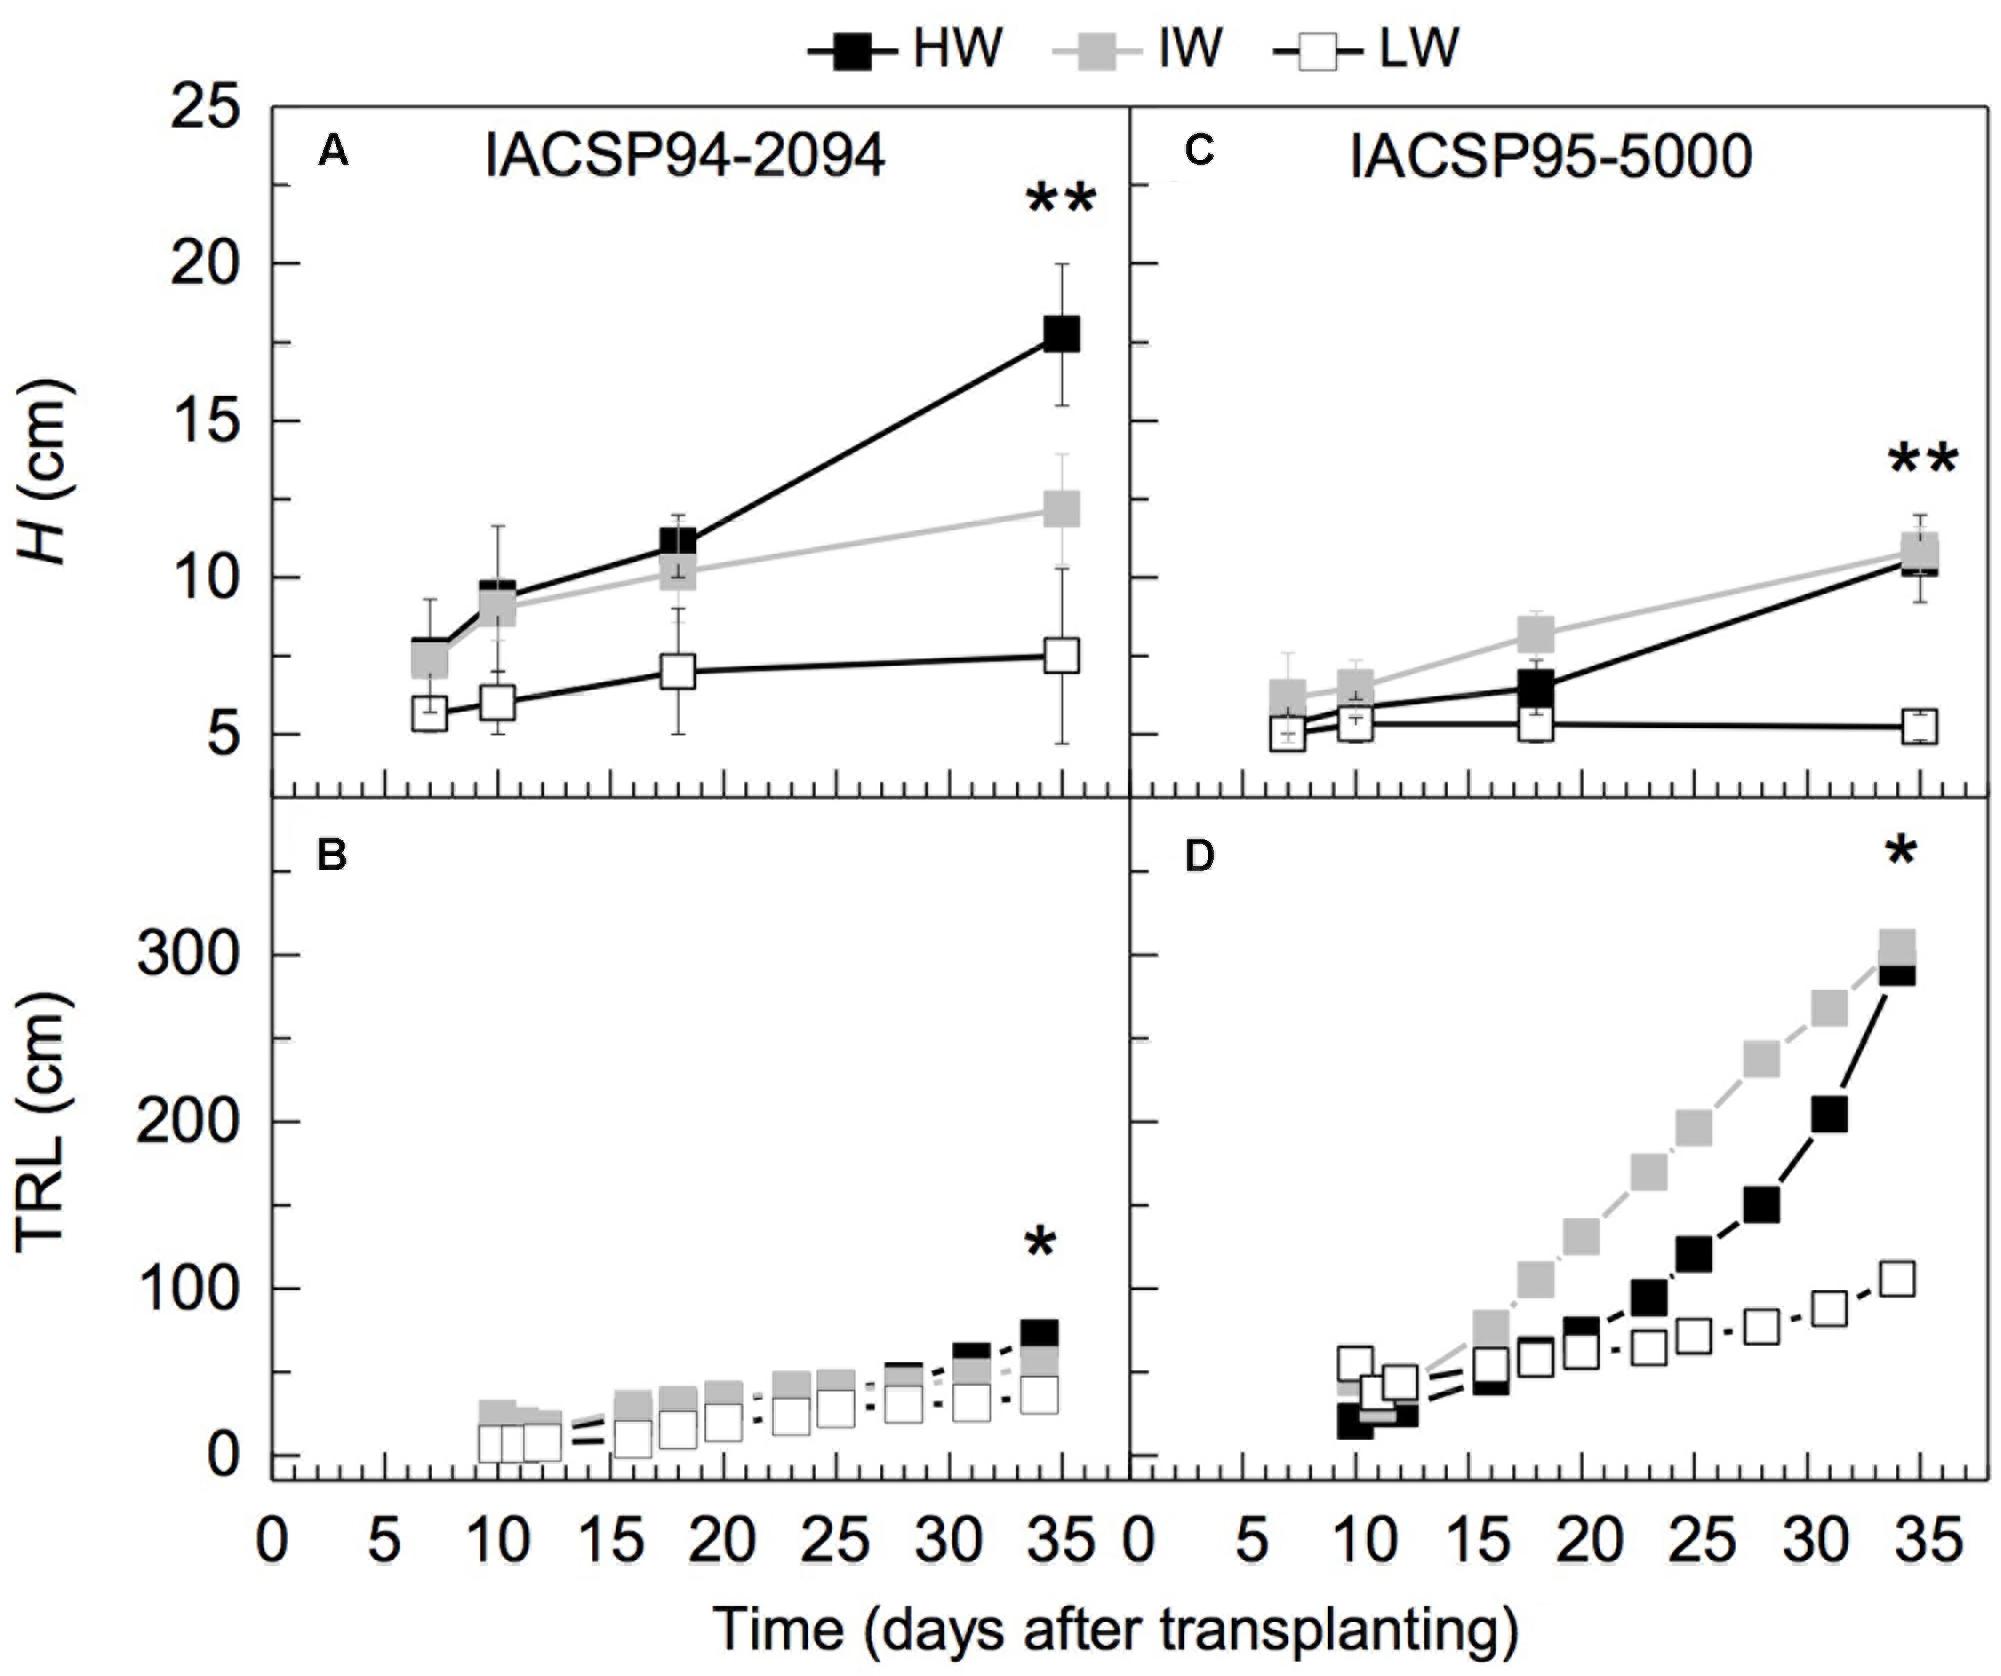 Physiological Plasticity Is Important for Maintaining Sugarcane Growth under Water Deficit